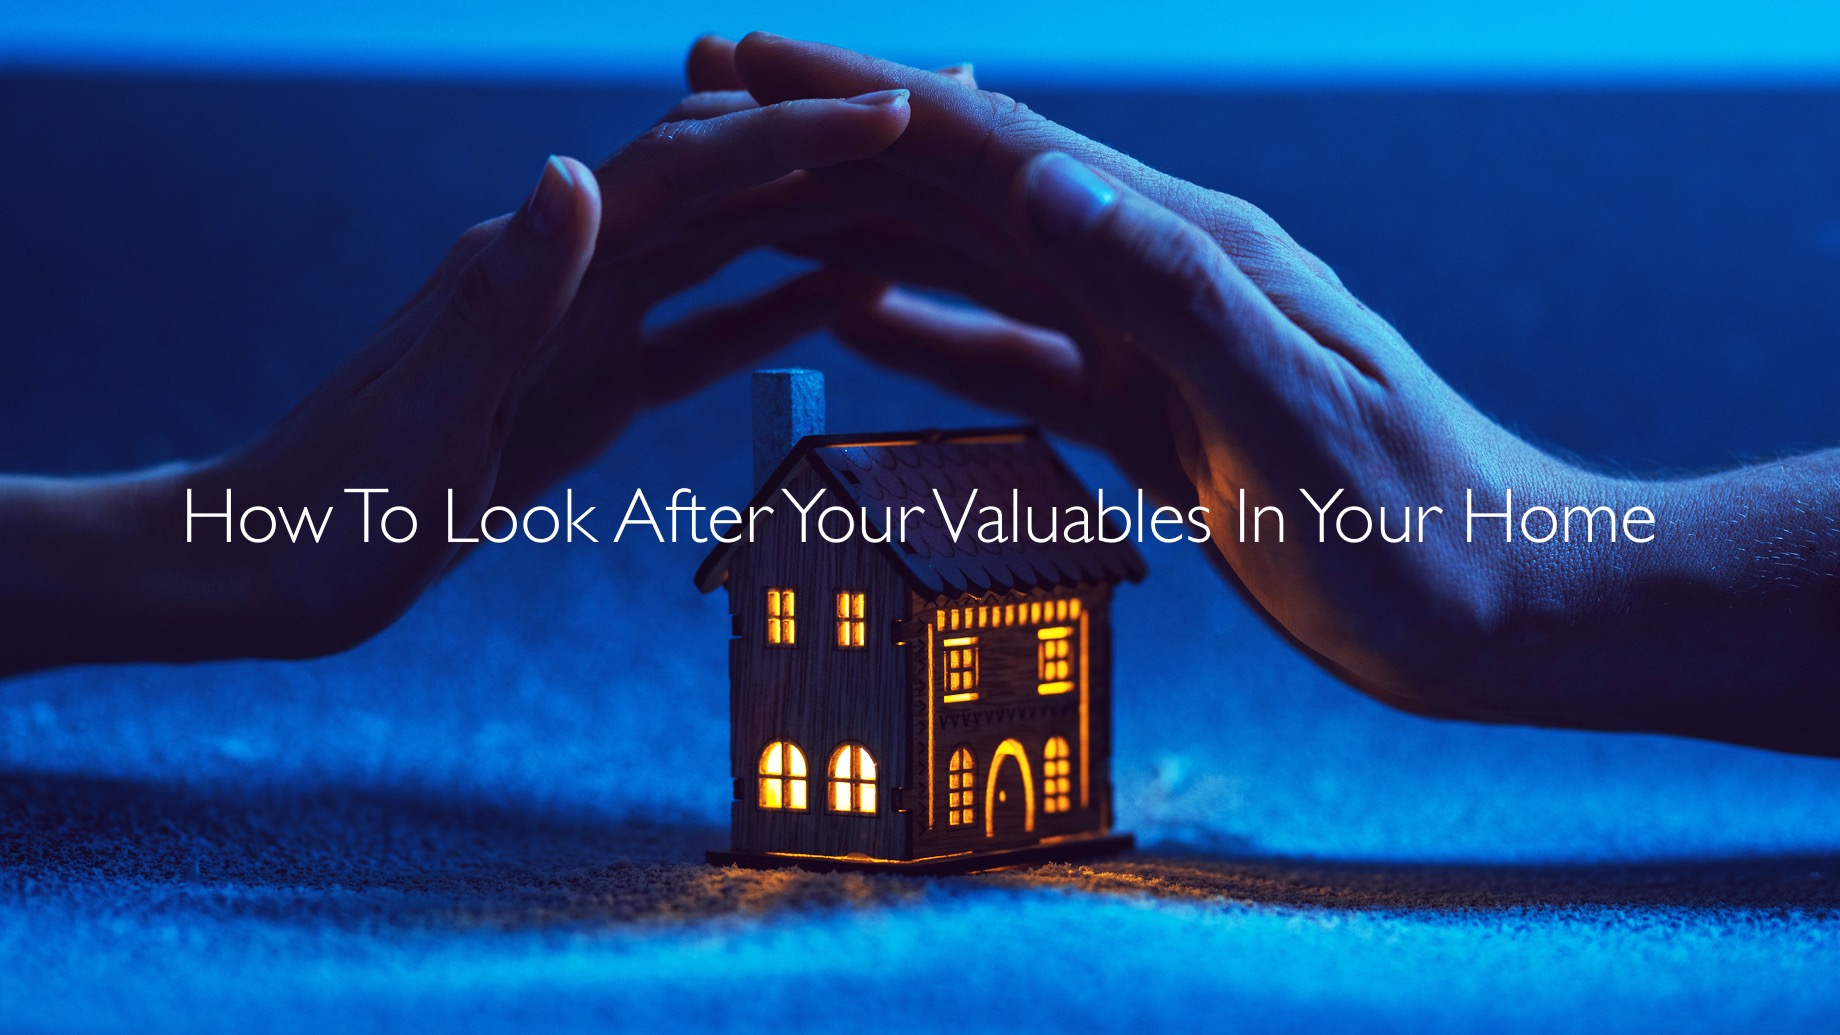 How To Look After Your Valuables In Your Home